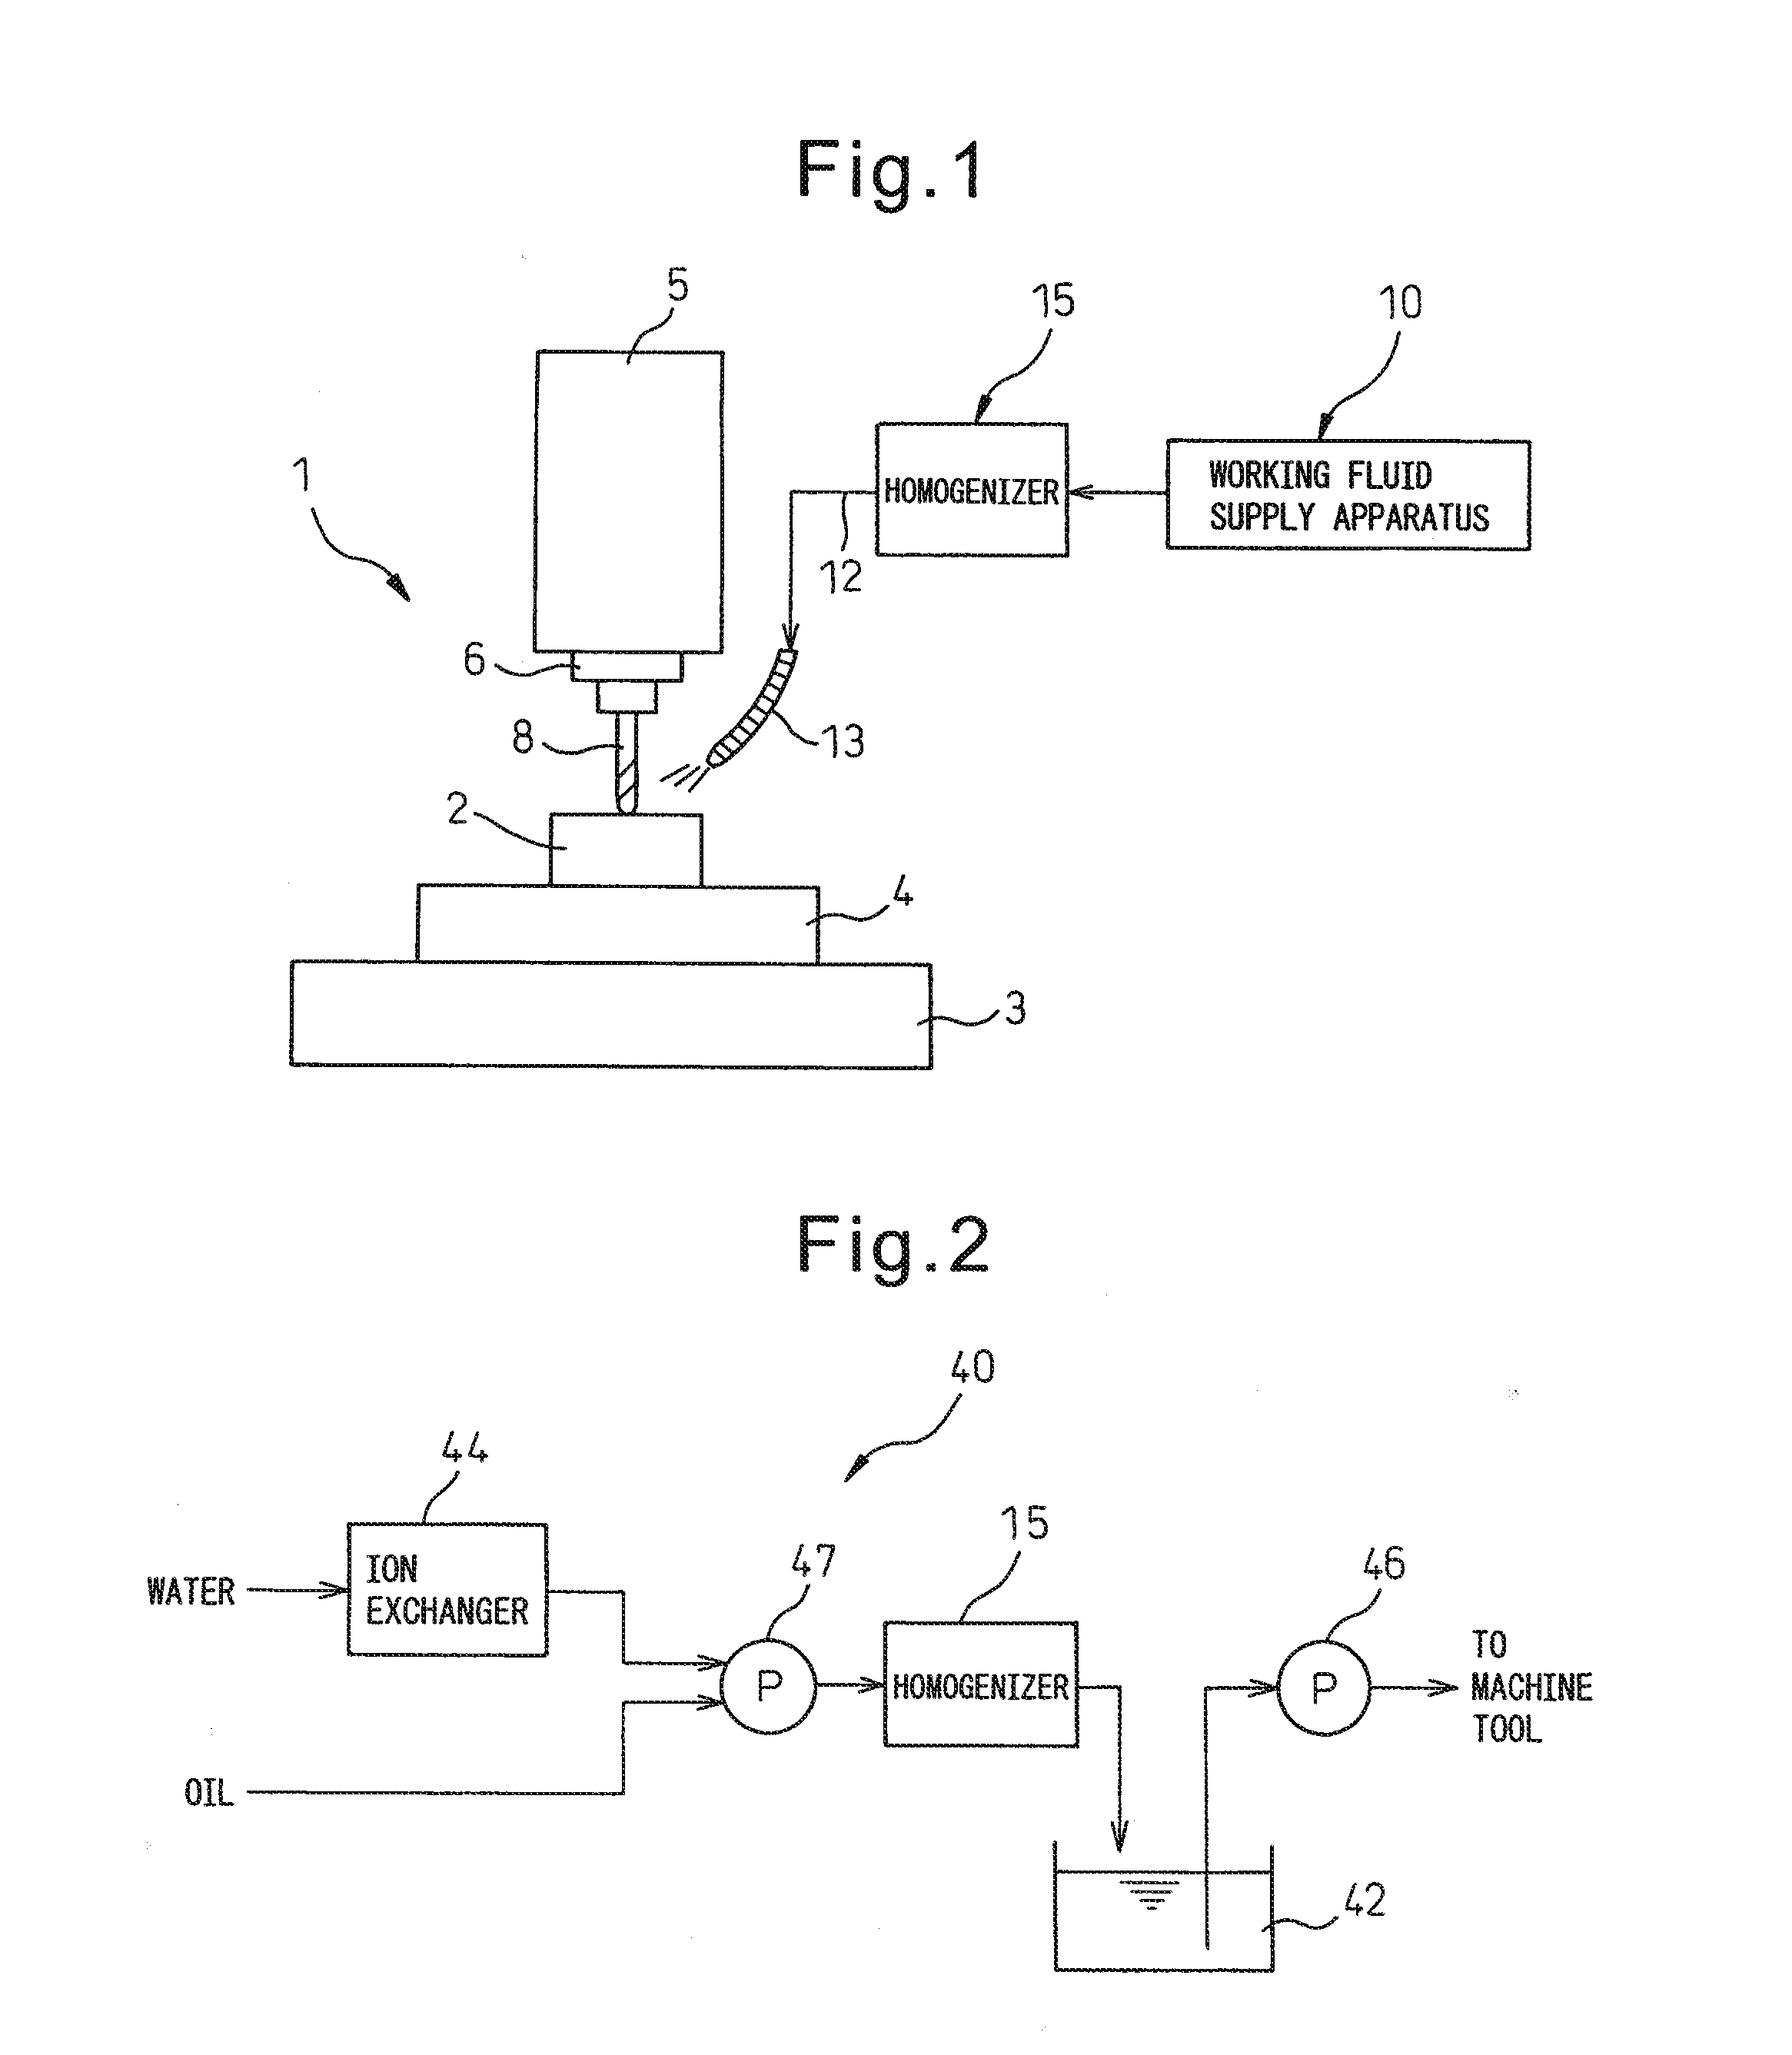 Machine tool, working fluid supply apparatus, and working fluid